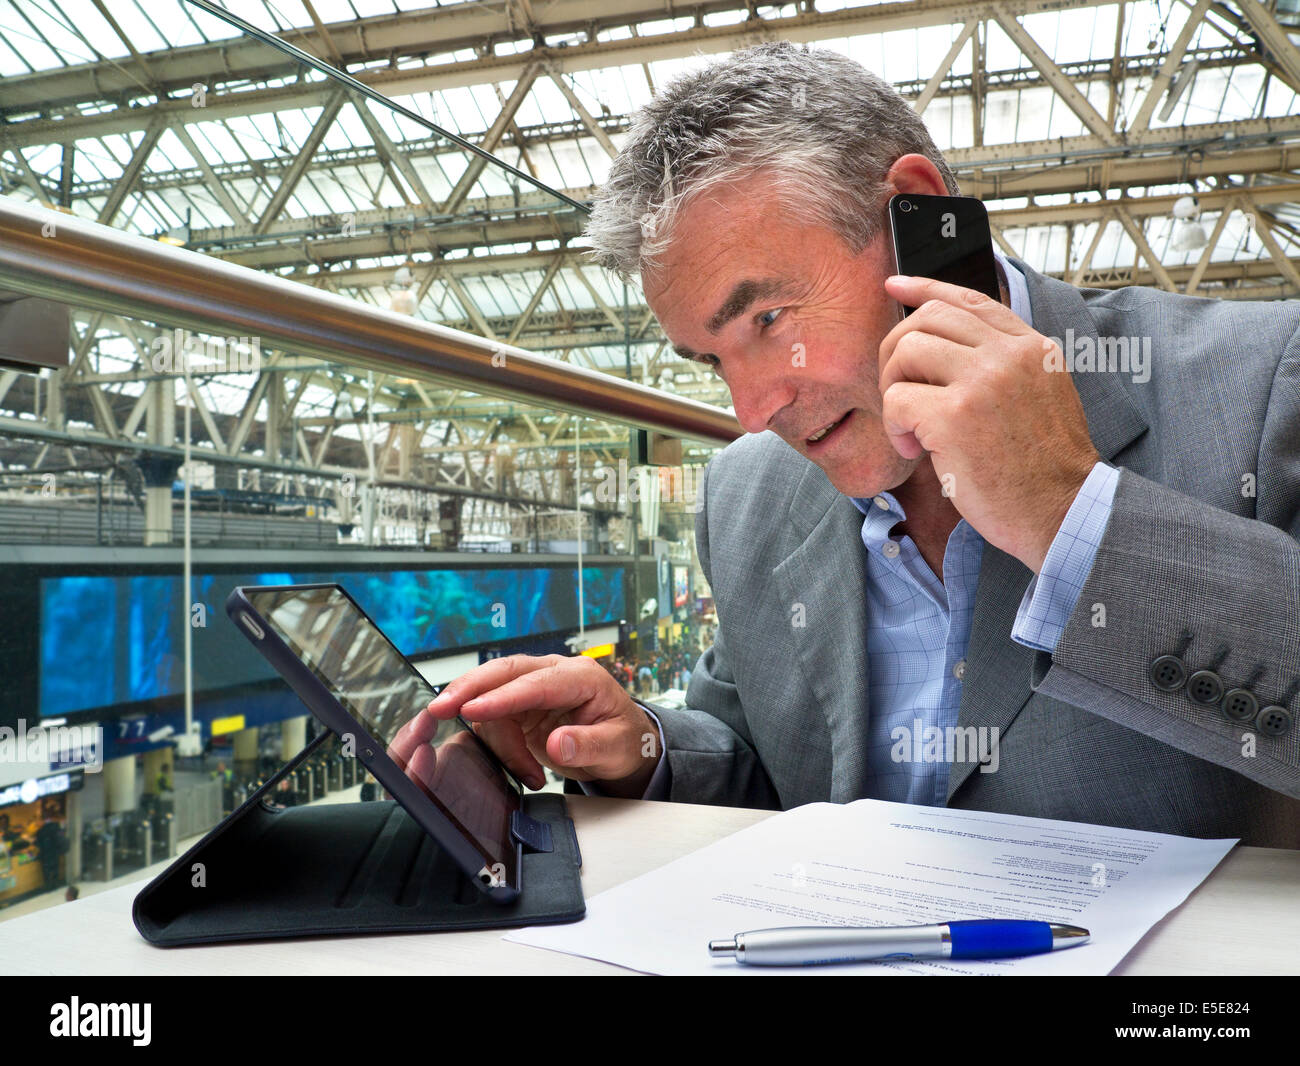 Mature businessman seated at cafe table on railway concourse looking at his tablet computer screen and using his smartphone Stock Photo